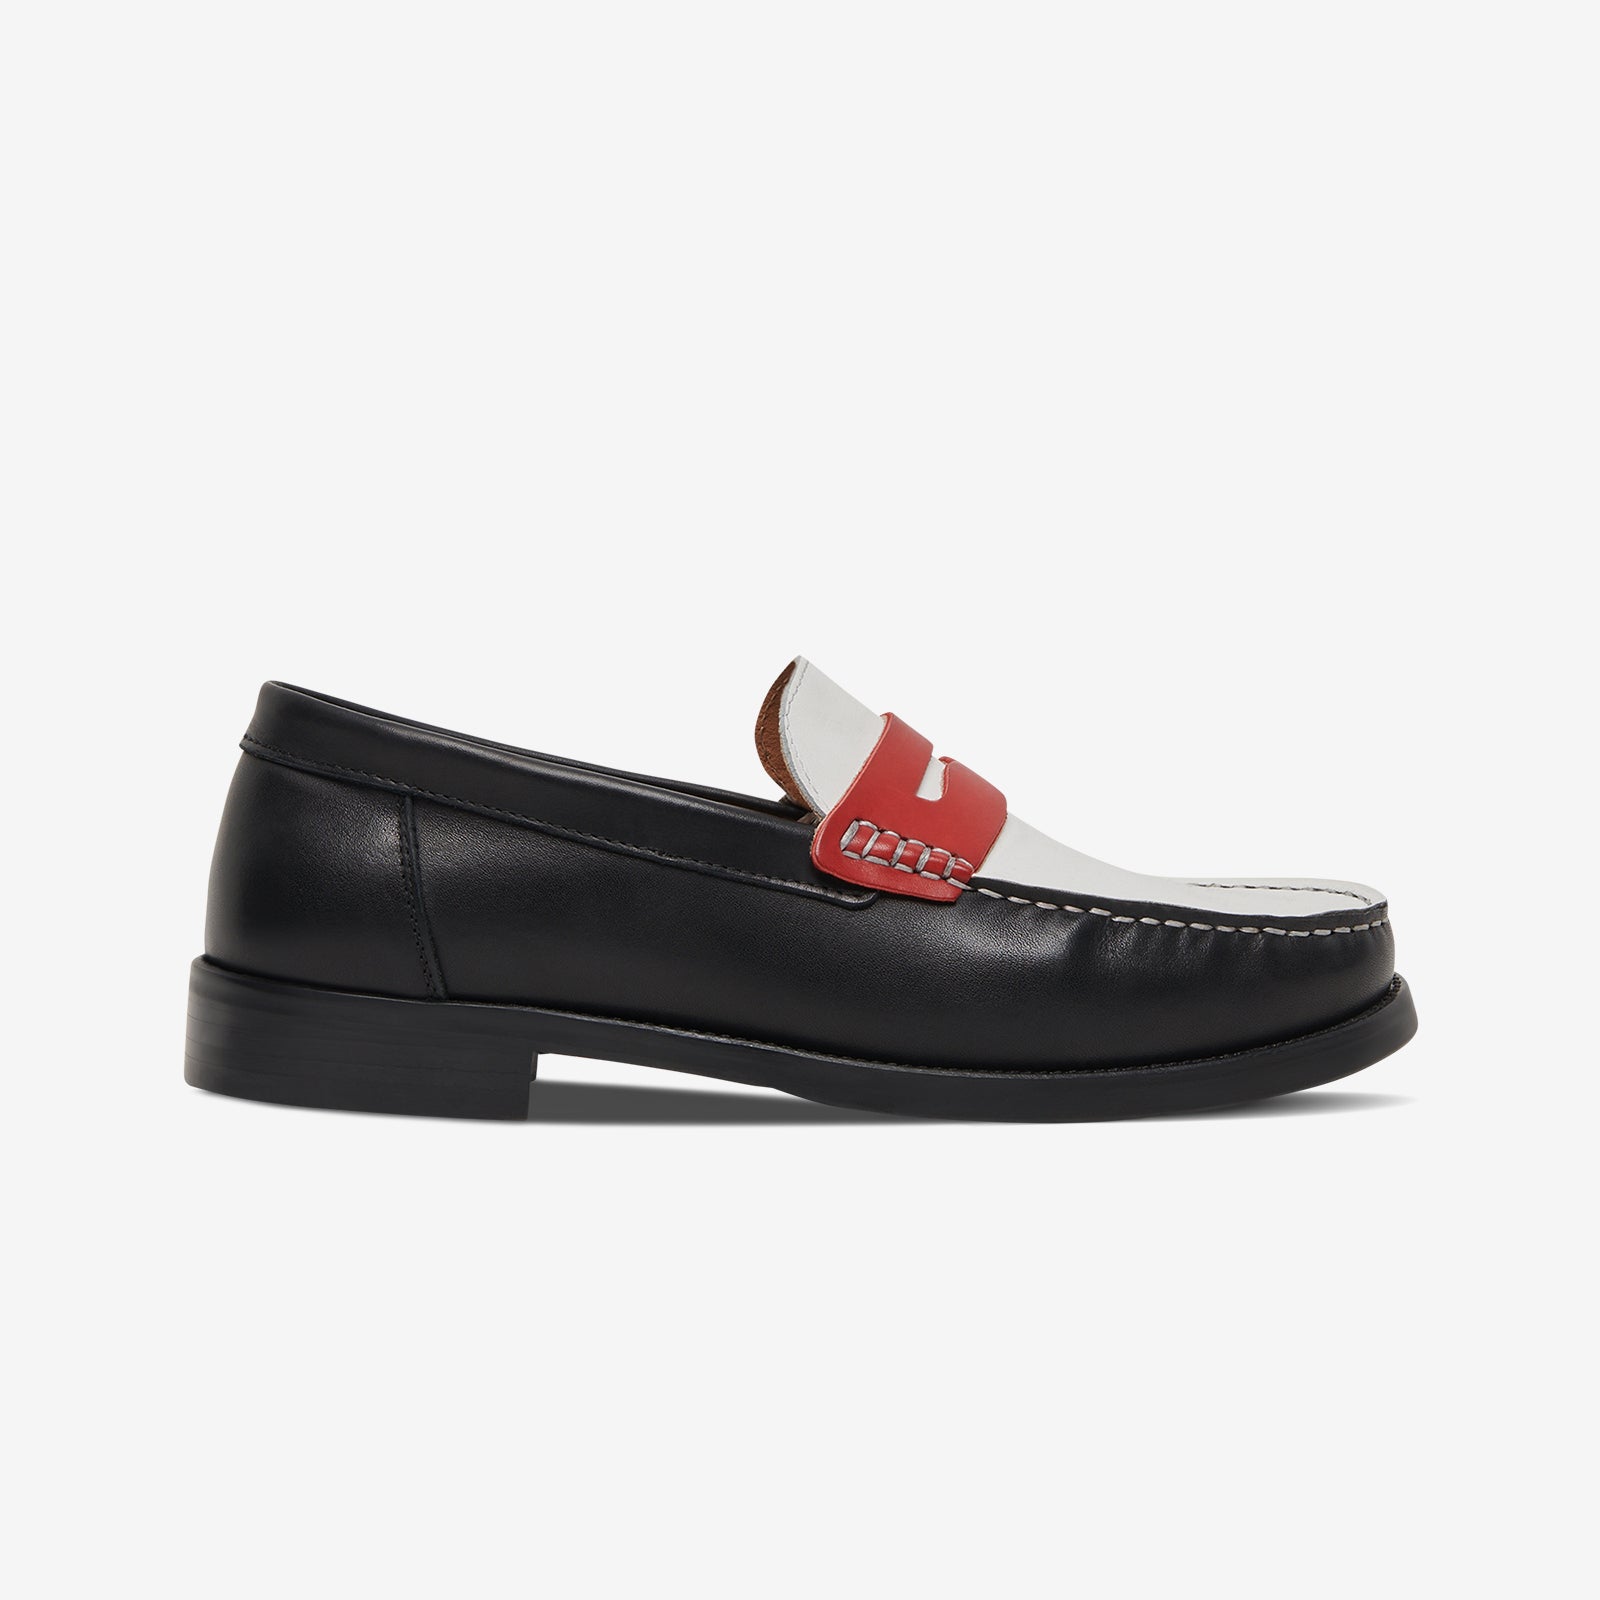 The Essex Penny Loafer - Retro Red/Black | Men's Loafer | by Greats